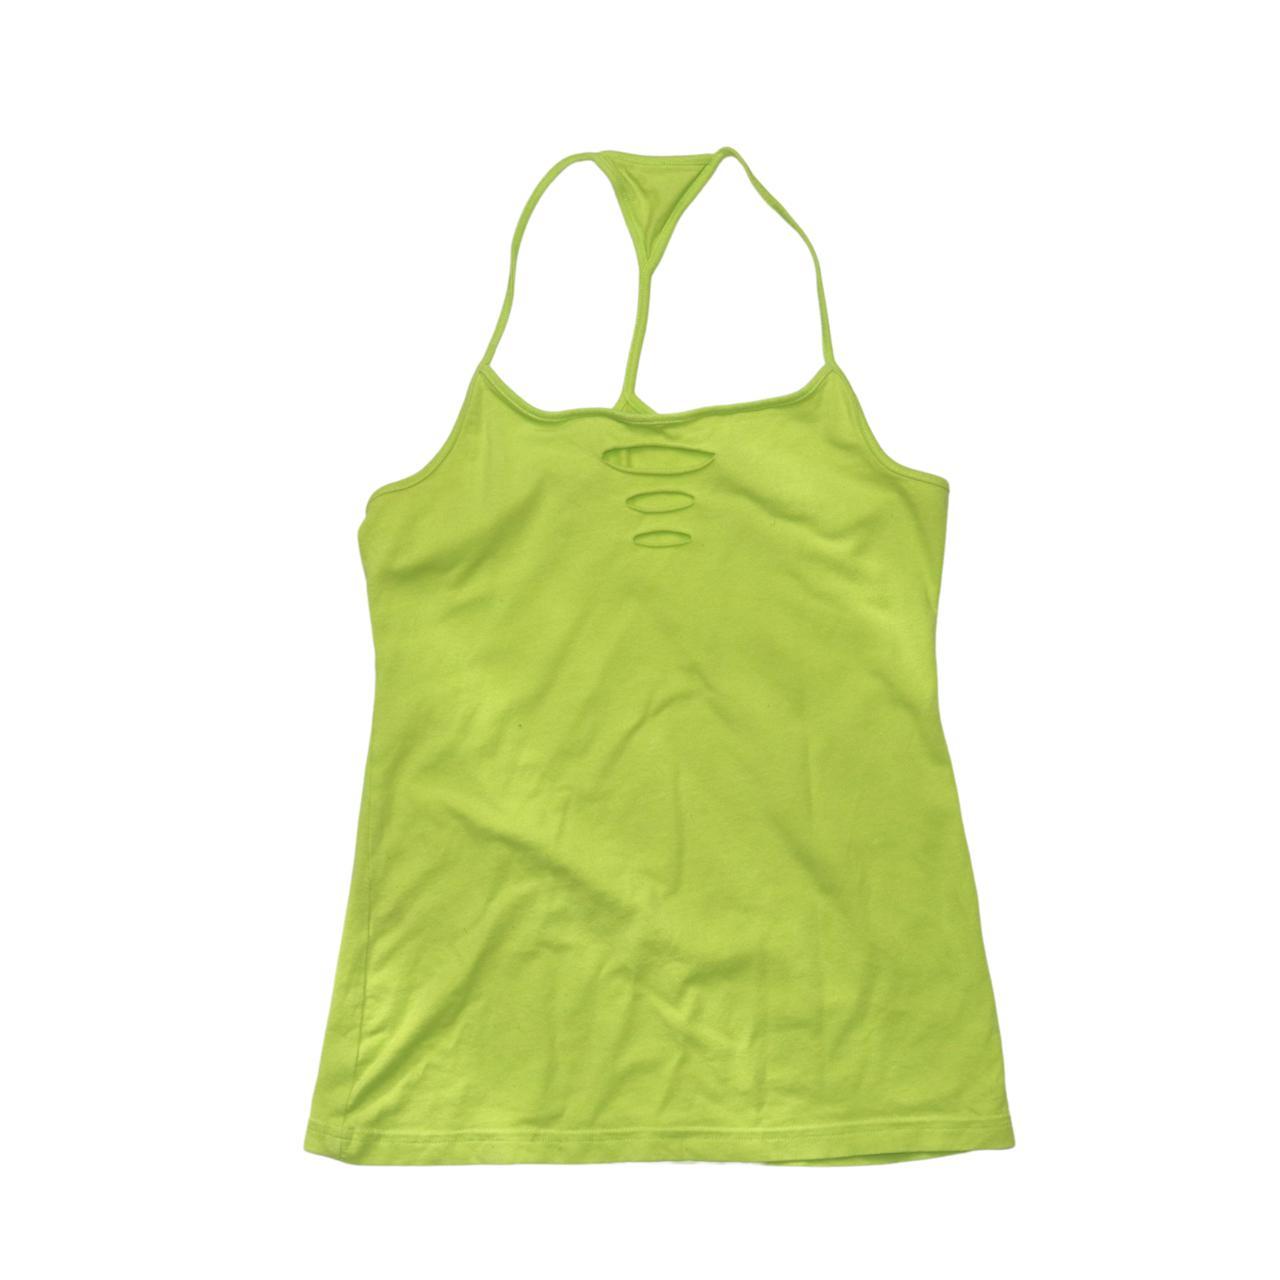 Product Image 1 - The Wannabe Cami Tank! Tag